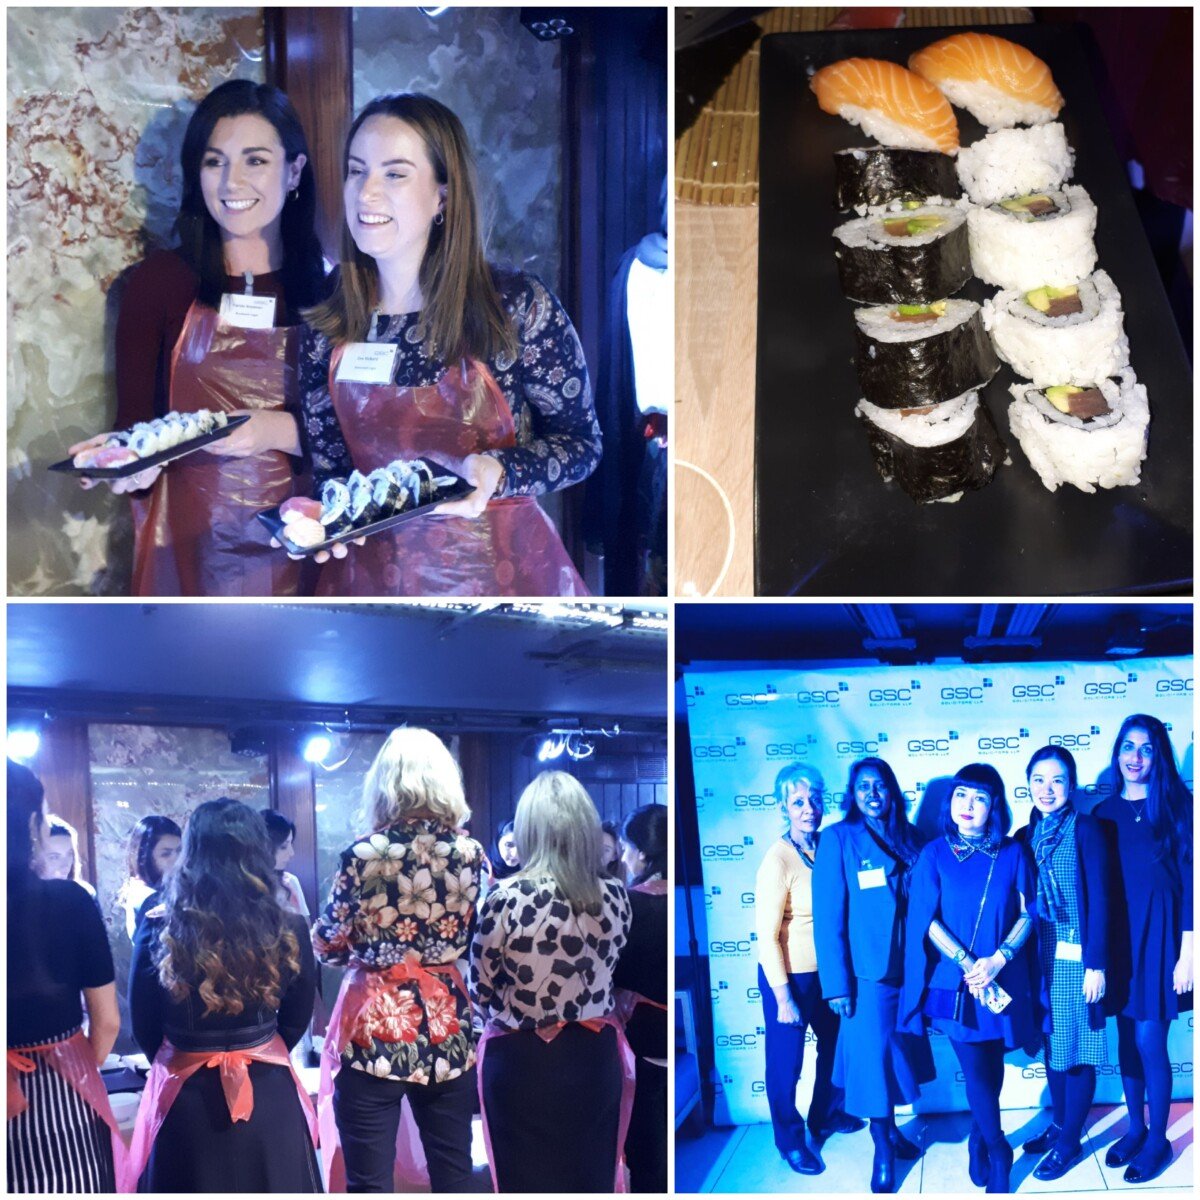 Another successful event – celebration of International Women’s Day